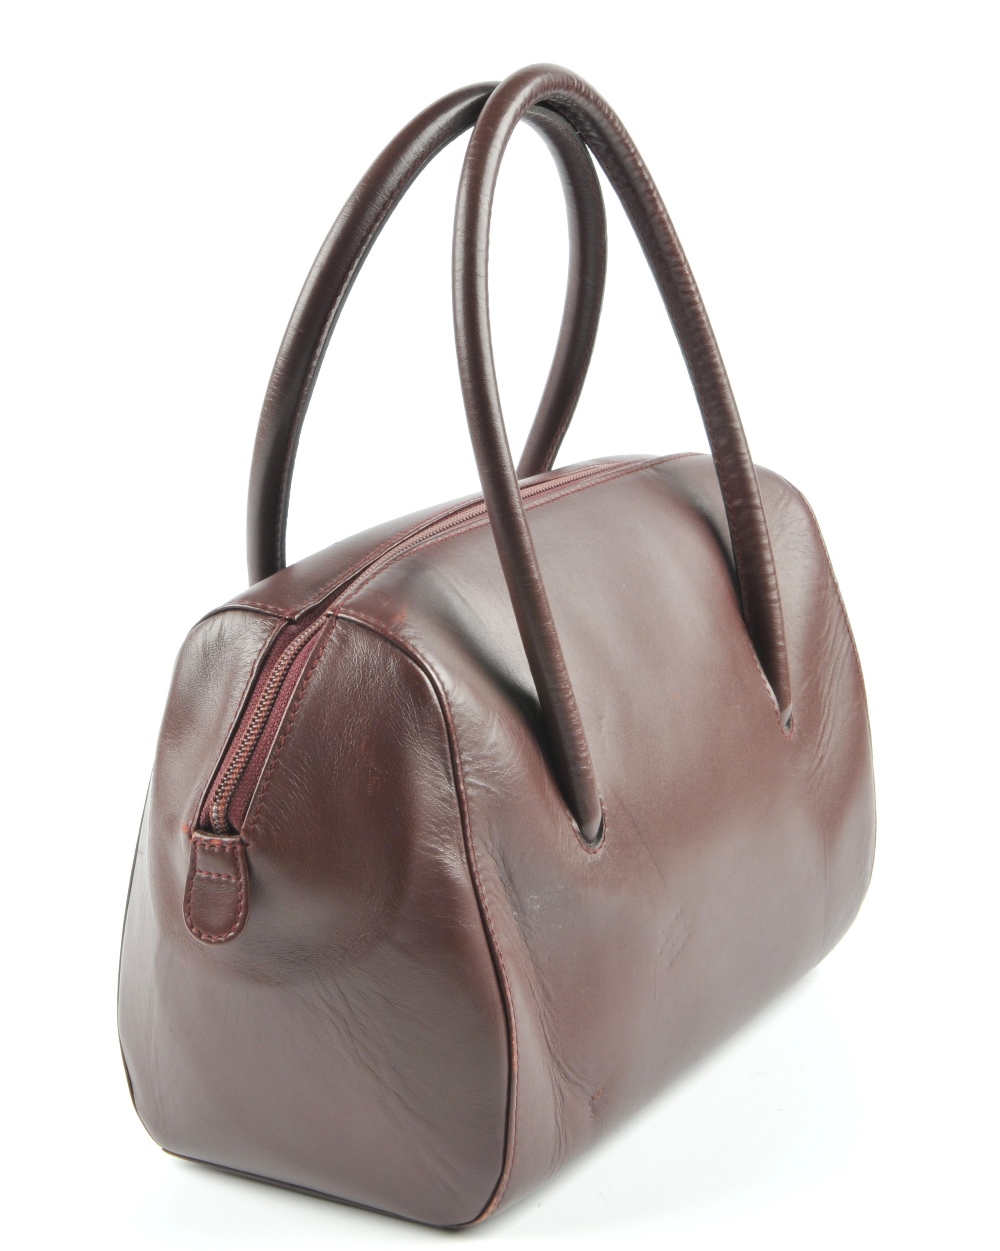 CARTIER - a Bordeaux Boston handbag. Featuring double thin looping handles, top zip fastening, - Image 4 of 5